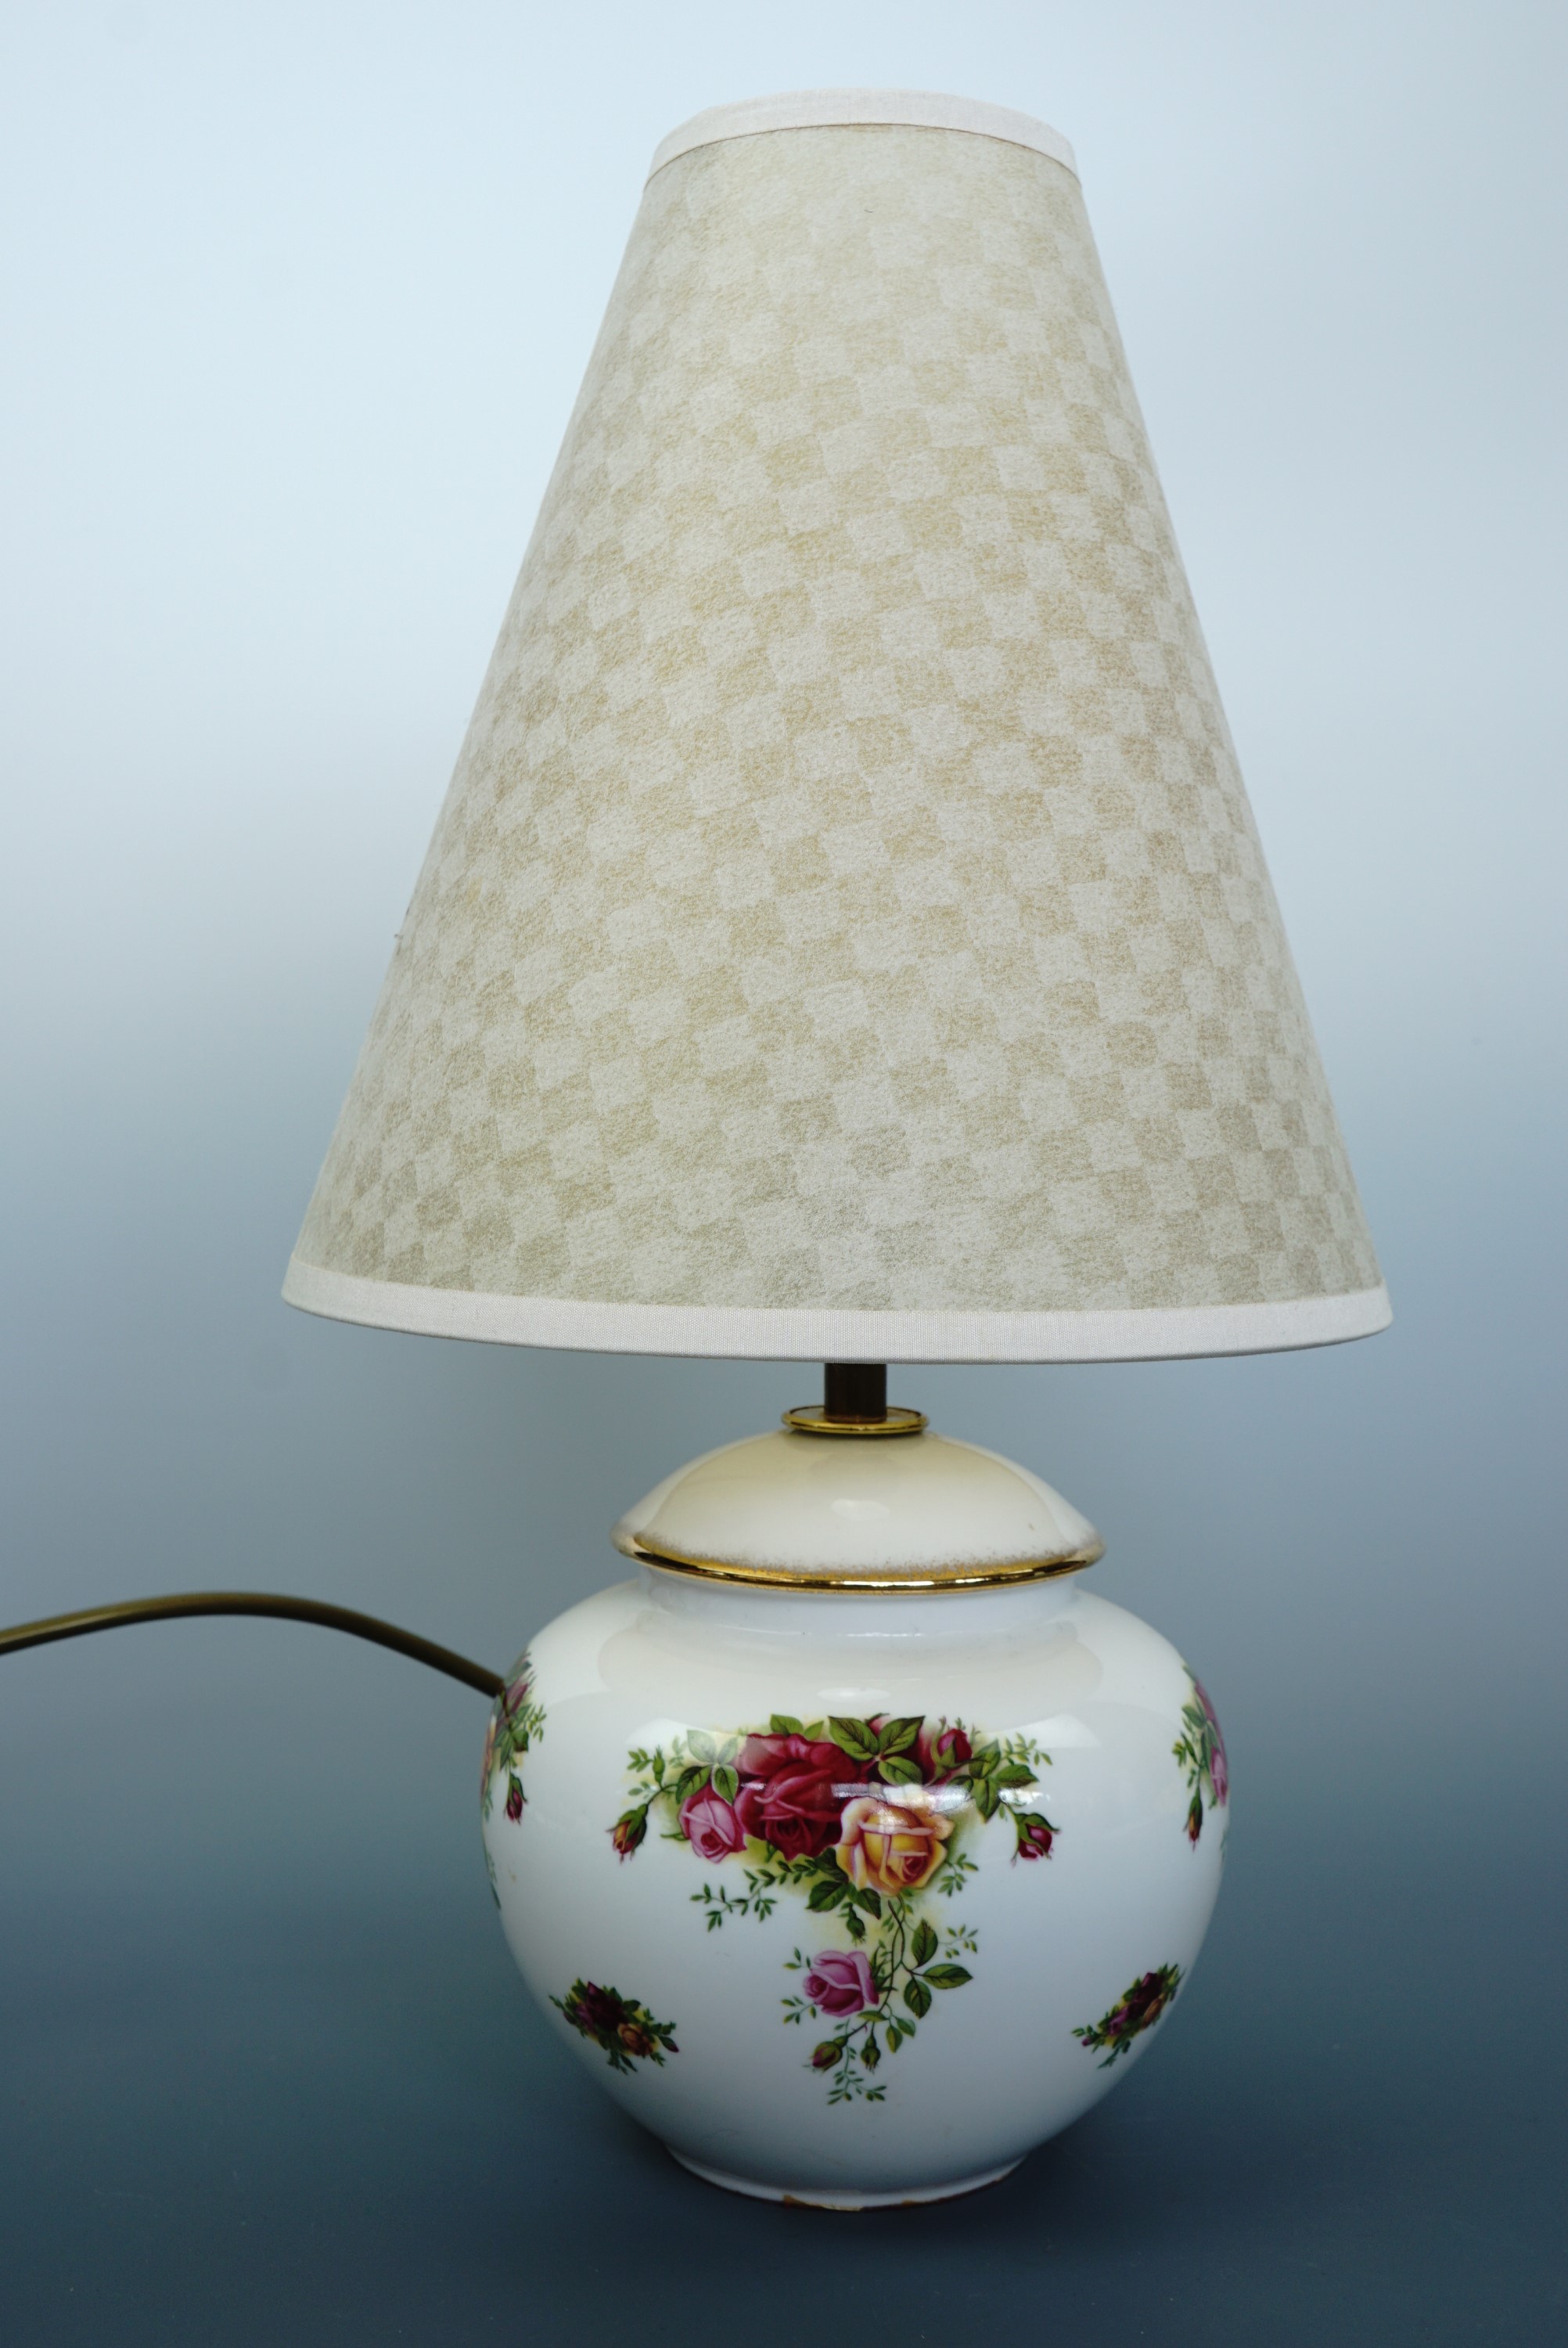 A Royal Albert Old Country Rose table lamp, 40 cm, (free of damage)